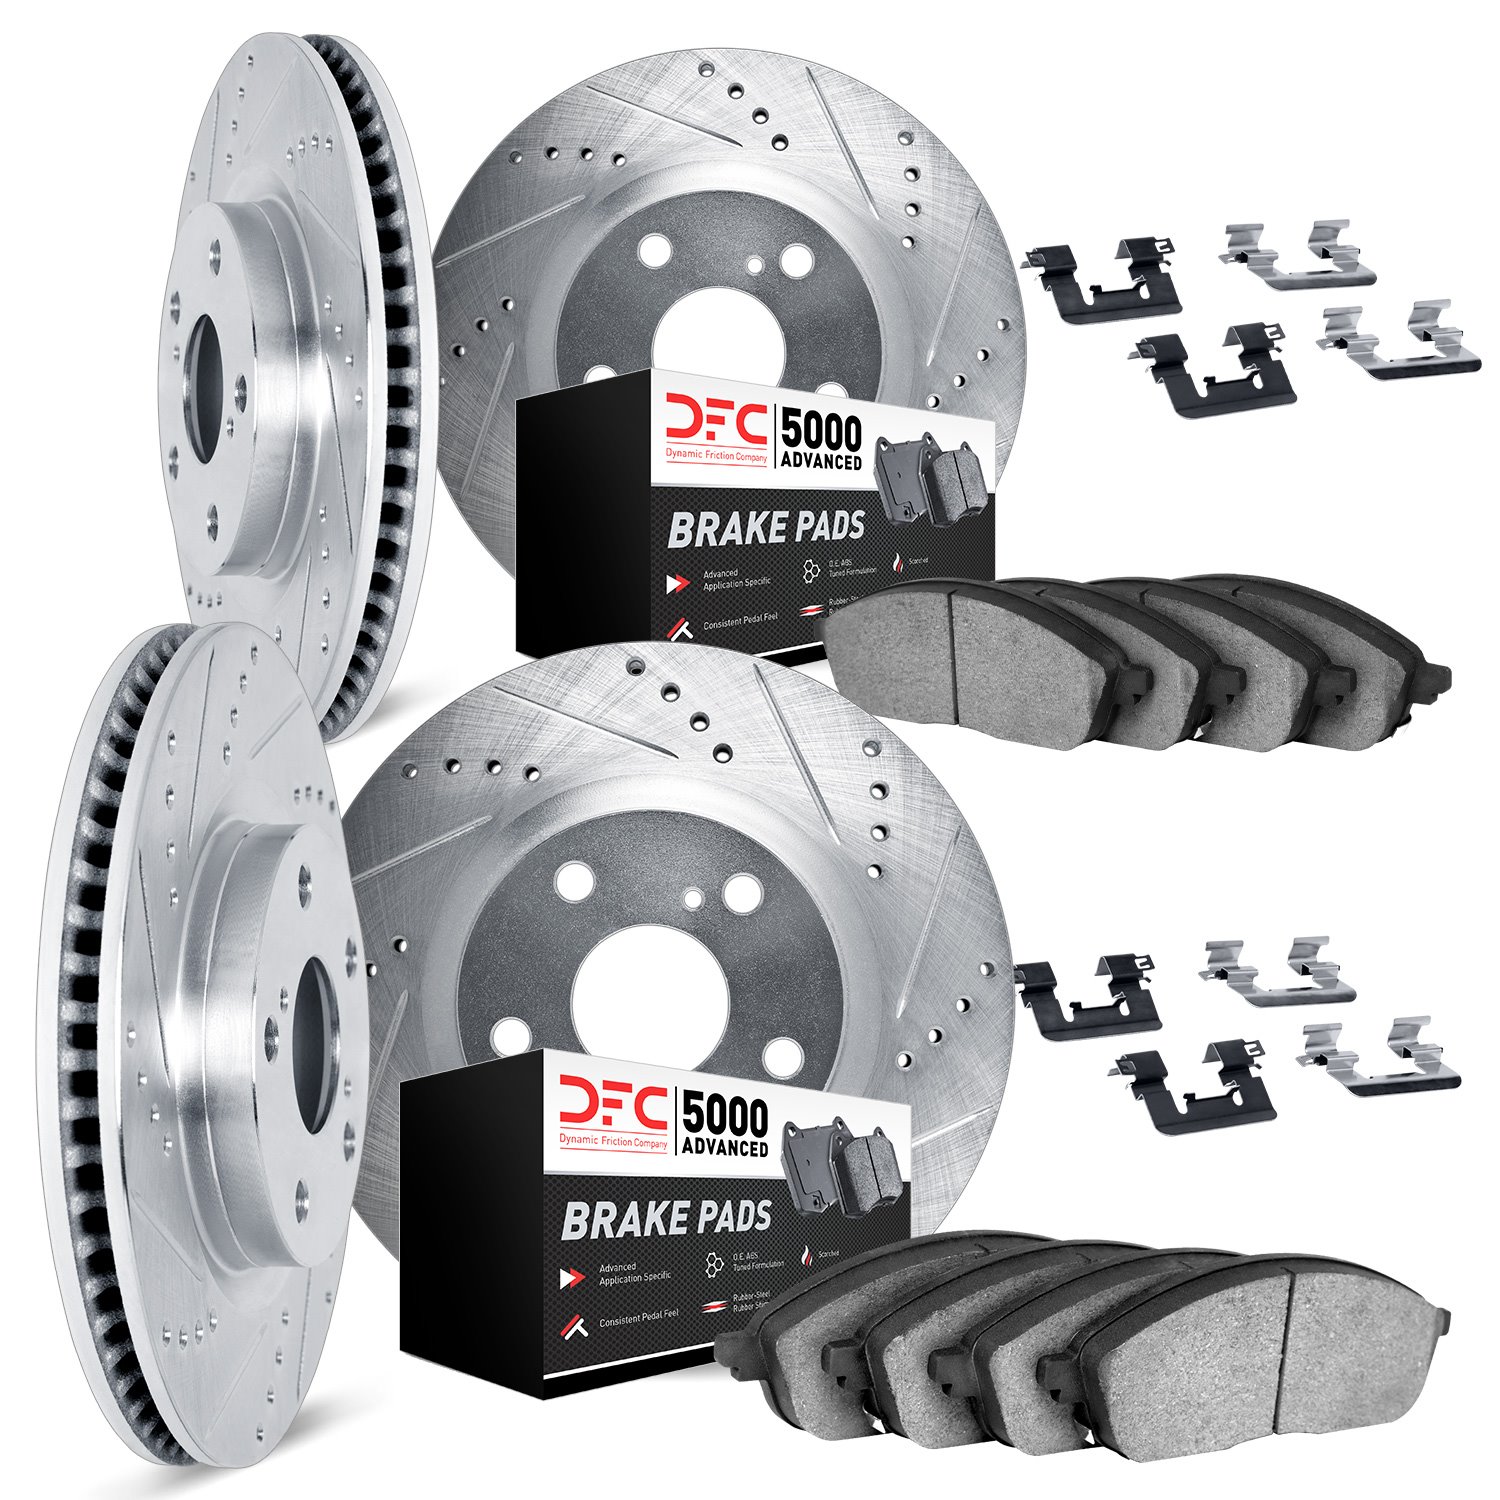 7514-31067 Drilled/Slotted Brake Rotors w/5000 Advanced Brake Pads Kit & Hardware [Silver], 2007-2013 BMW, Position: Front and R